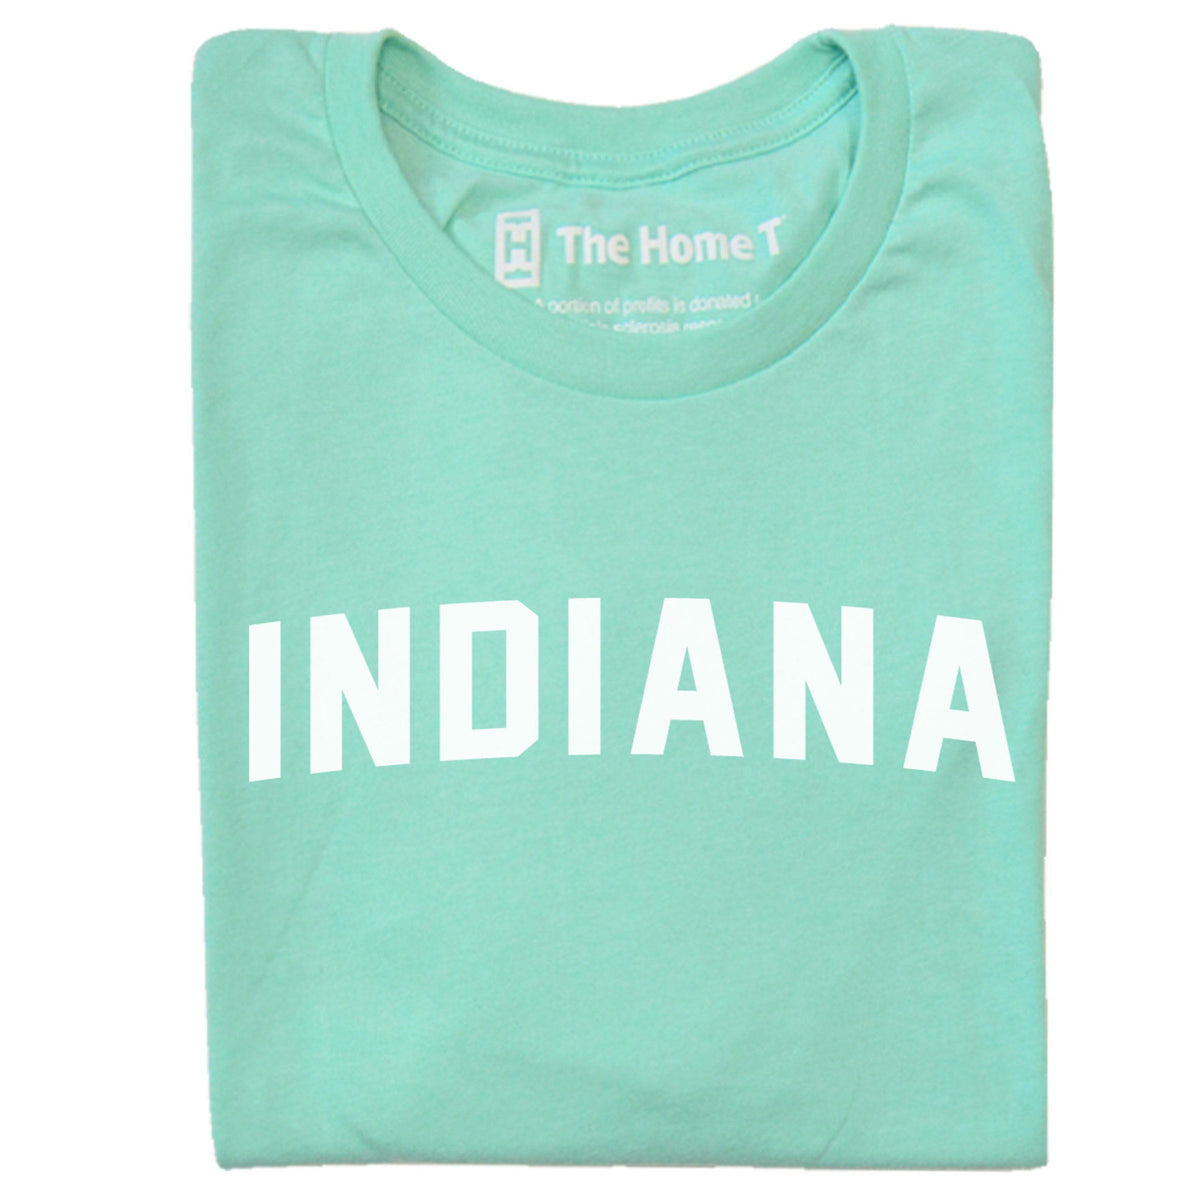 Indiana Arched The Home T XS Mint